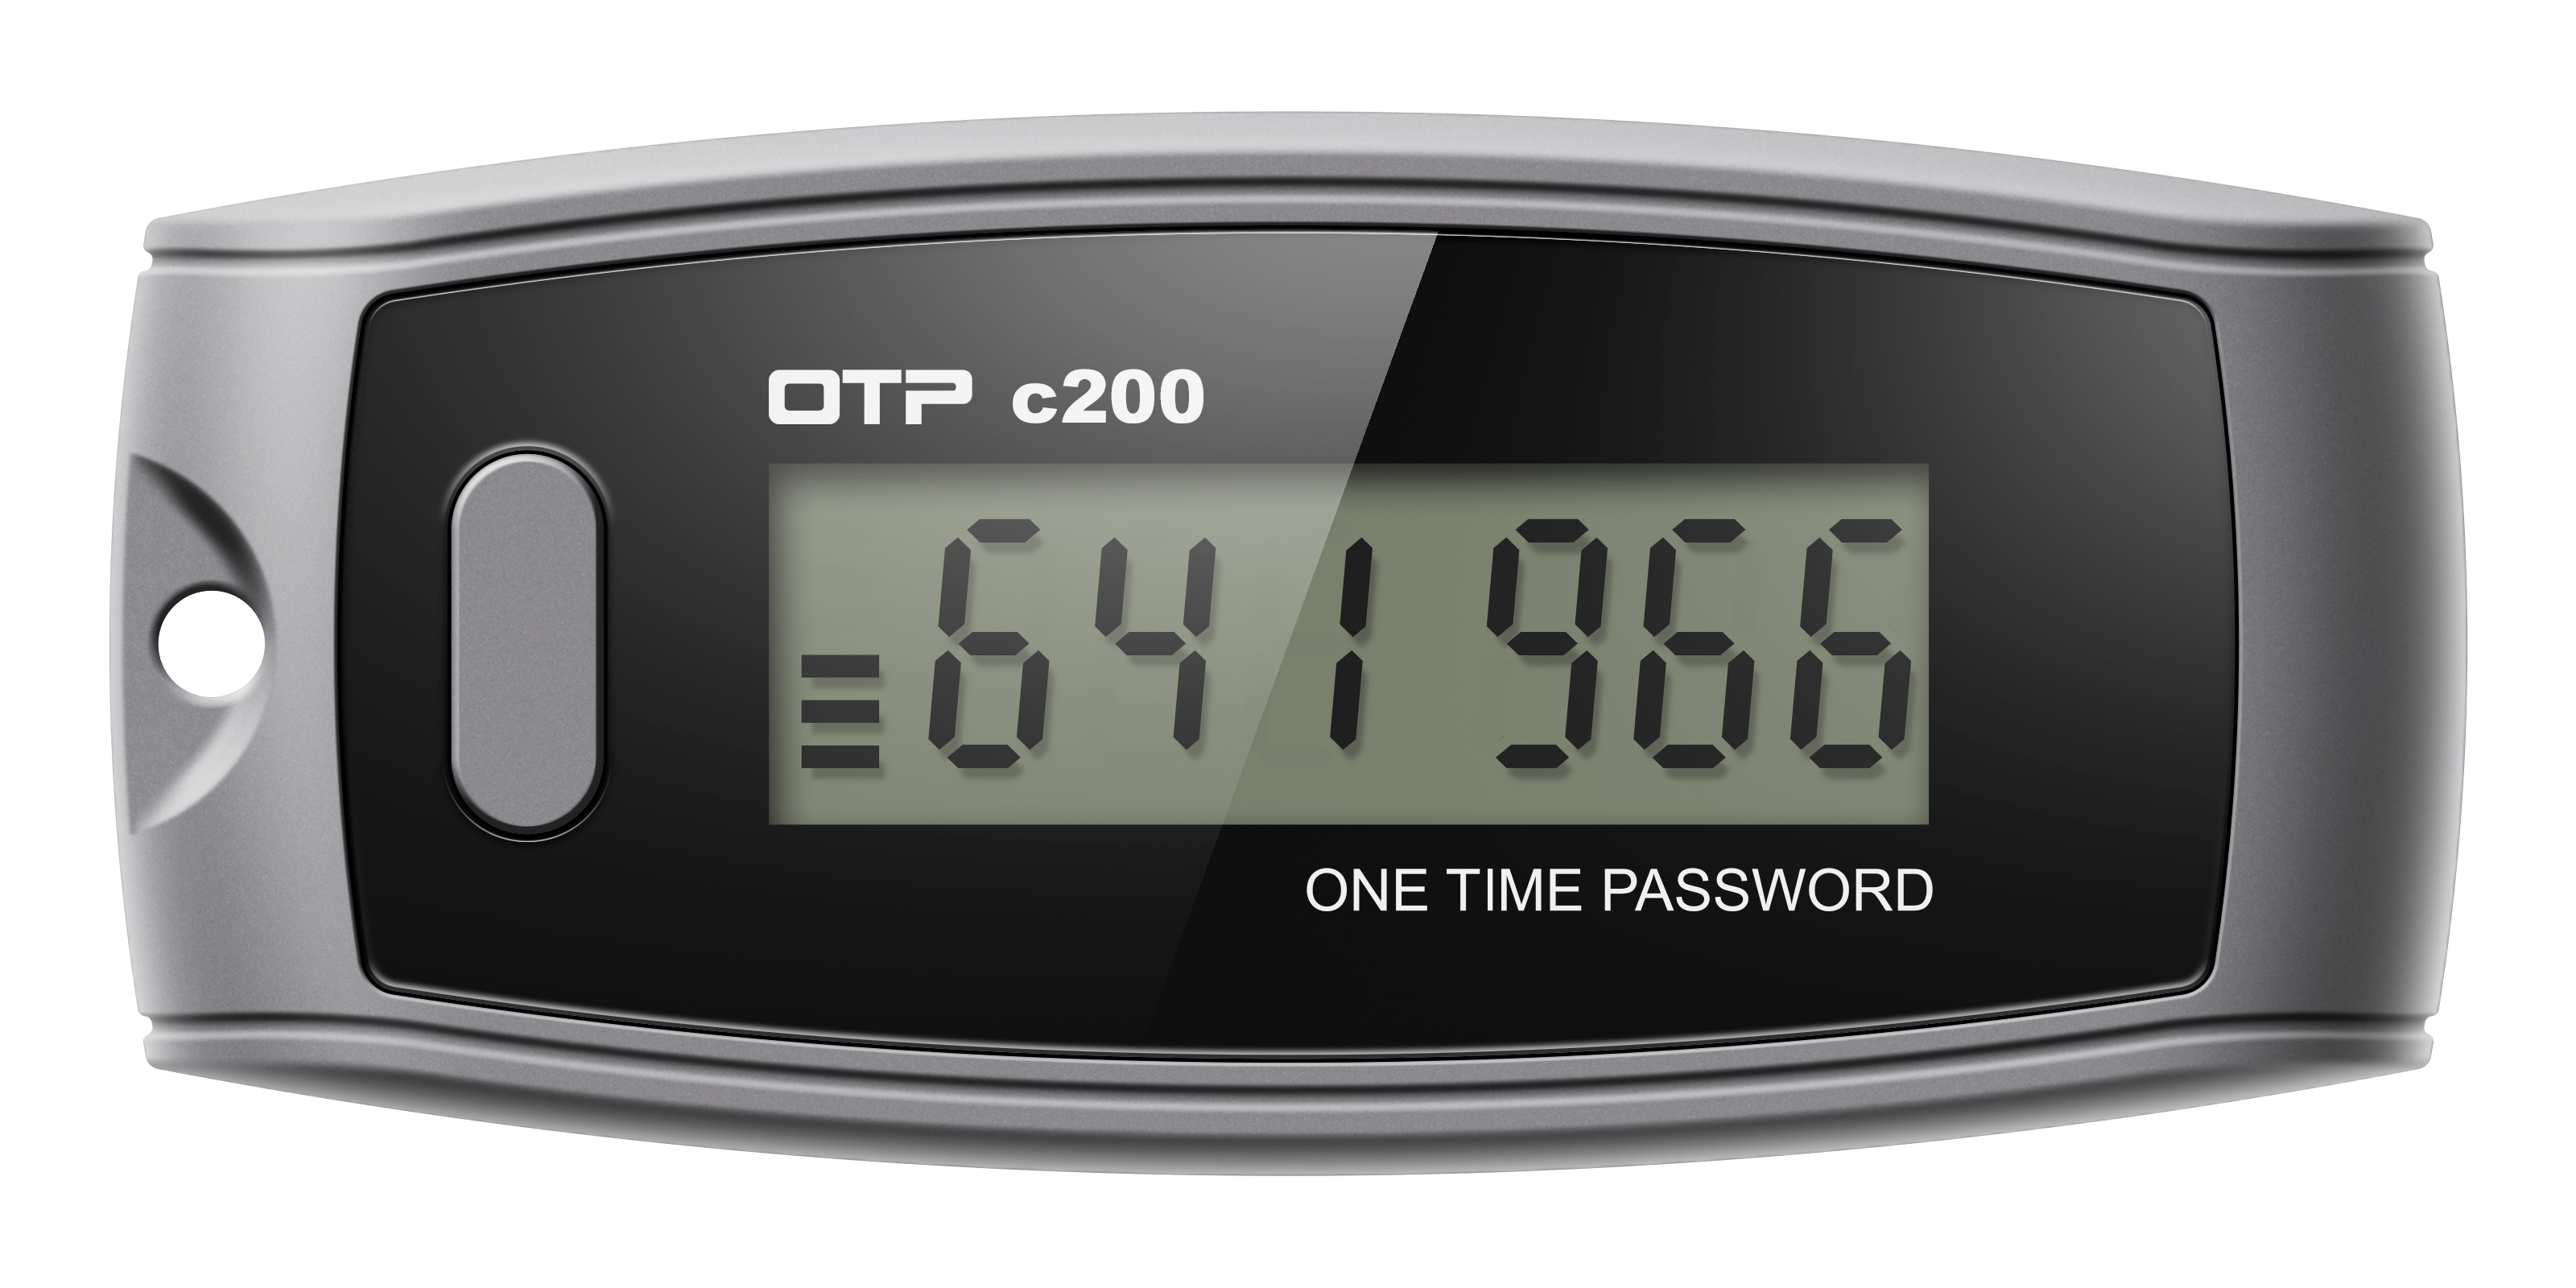 What is a Time-based One-time Password (TOTP)?